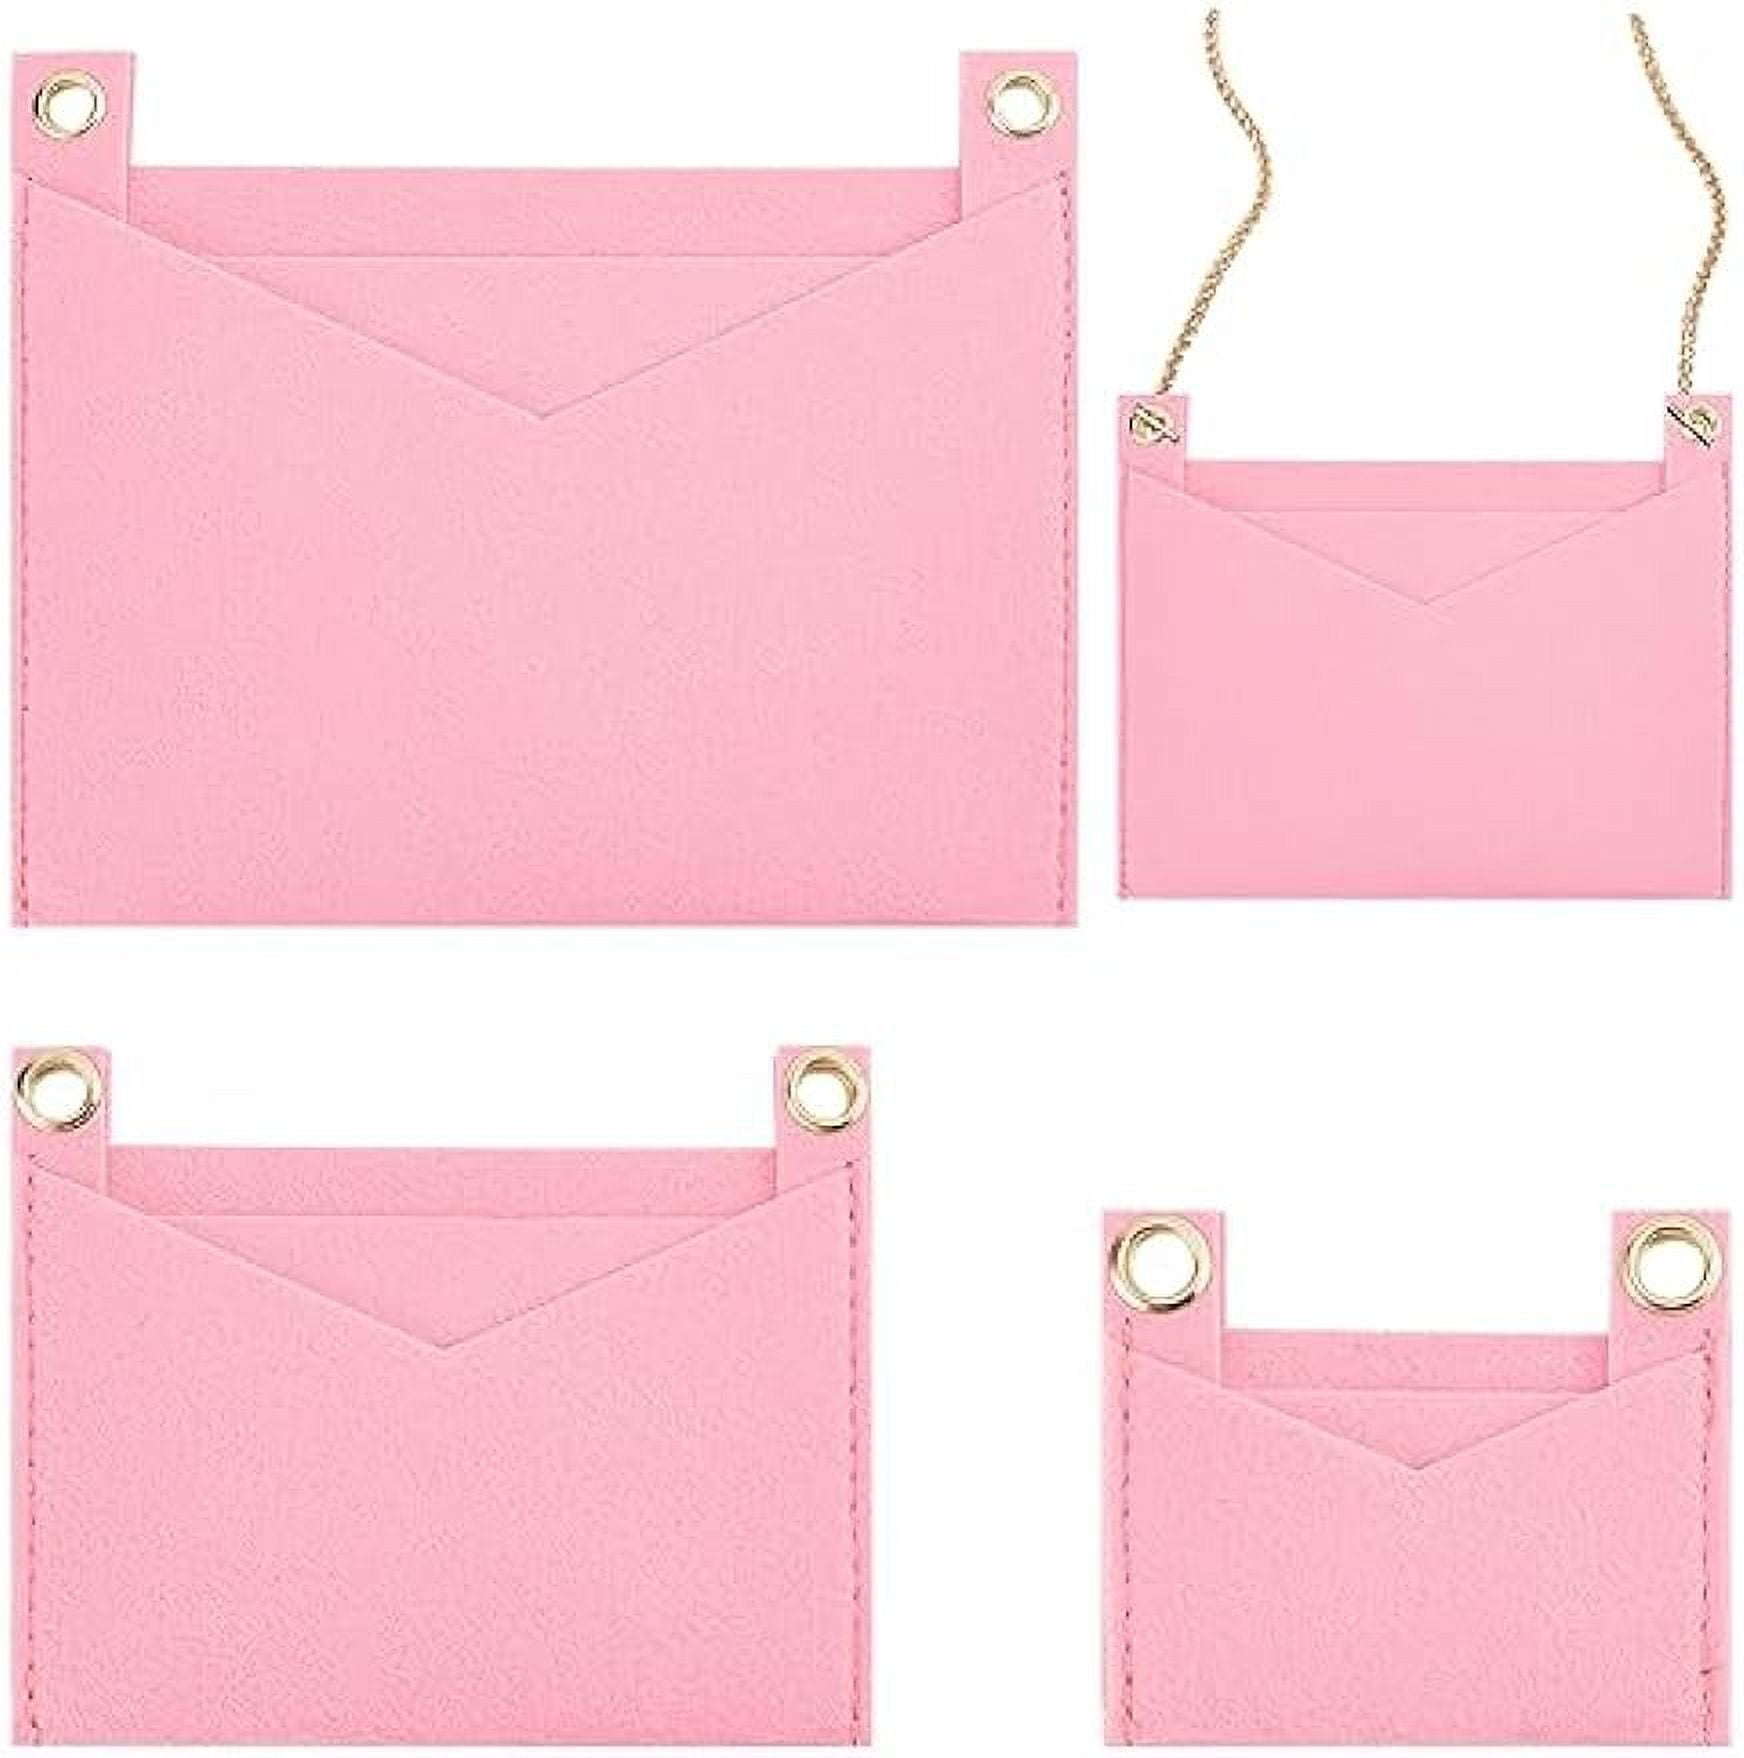  Lckaey purse Organizer insert conversion kit josephine ror lv  wallet Sarah bag Emilie Wallet, Bag accessories, inner bag 3015-Pink :  Clothing, Shoes & Jewelry